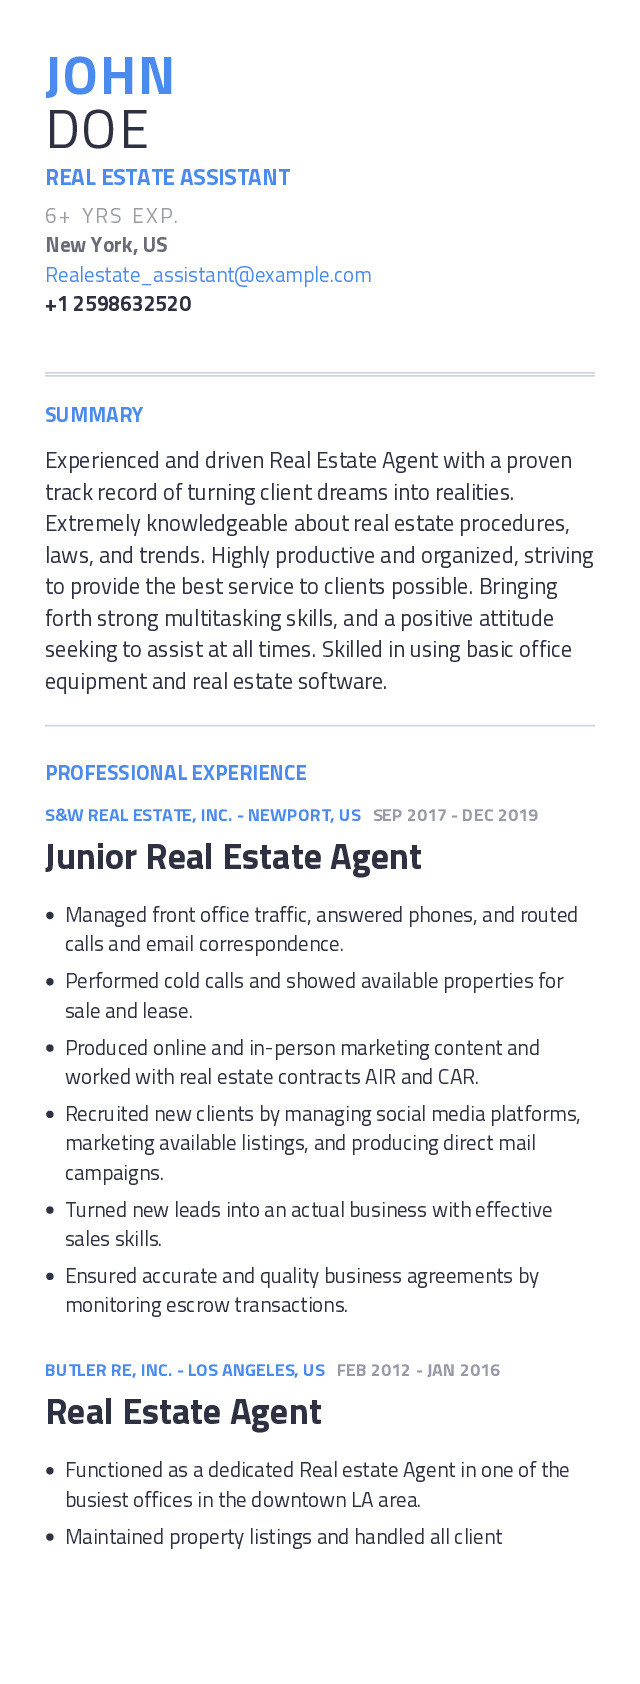 Sample Resume Administrative assistant Real Estate Office Real Estate assistant Resume Example with Content Sample Craftmycv